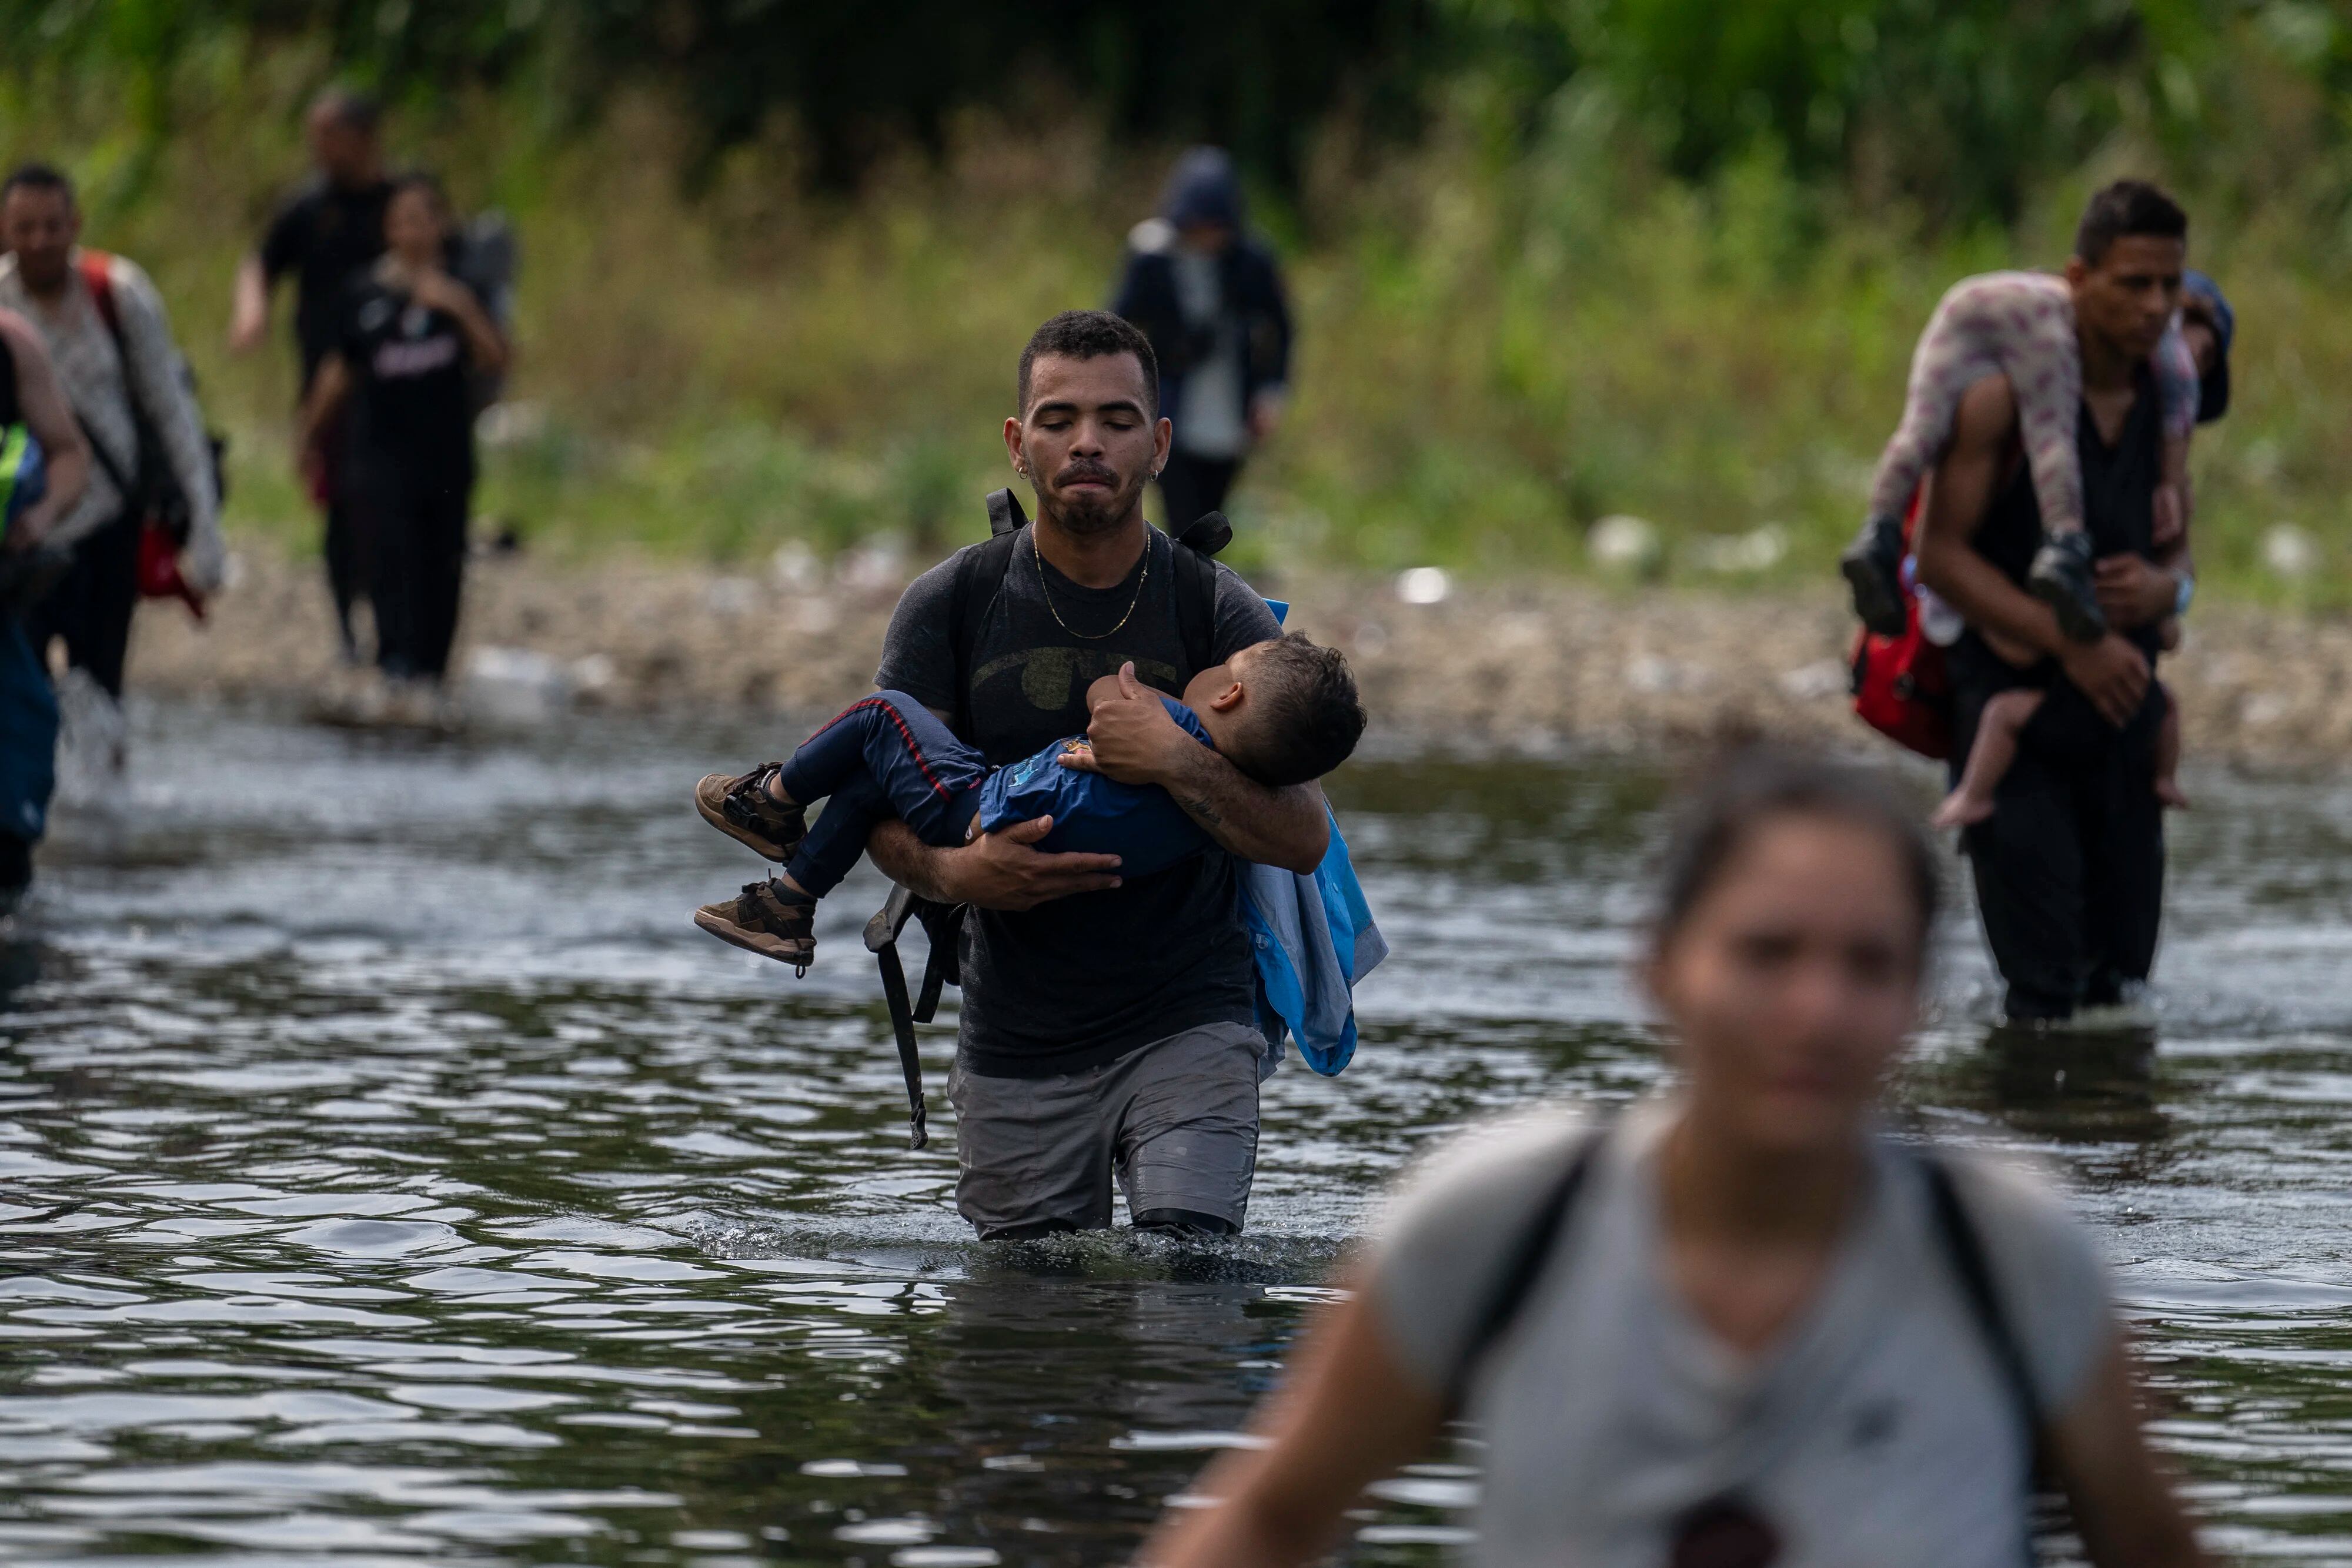 Migrants cross the Tuquesa river near Bajo Chiquito village, the first border control of the Darien Province in Panama, on September 22, 2023. The clandestine journey through the Darien Gap usually lasts five or six days, at the mercy of all kinds of bad weather. More than 390,000 migrants have entered Panama through this jungle so far this year, far more than in all of 2022, when there were 248,000, according to official Panamanian data. (Photo by Luis ACOSTA / AFP)